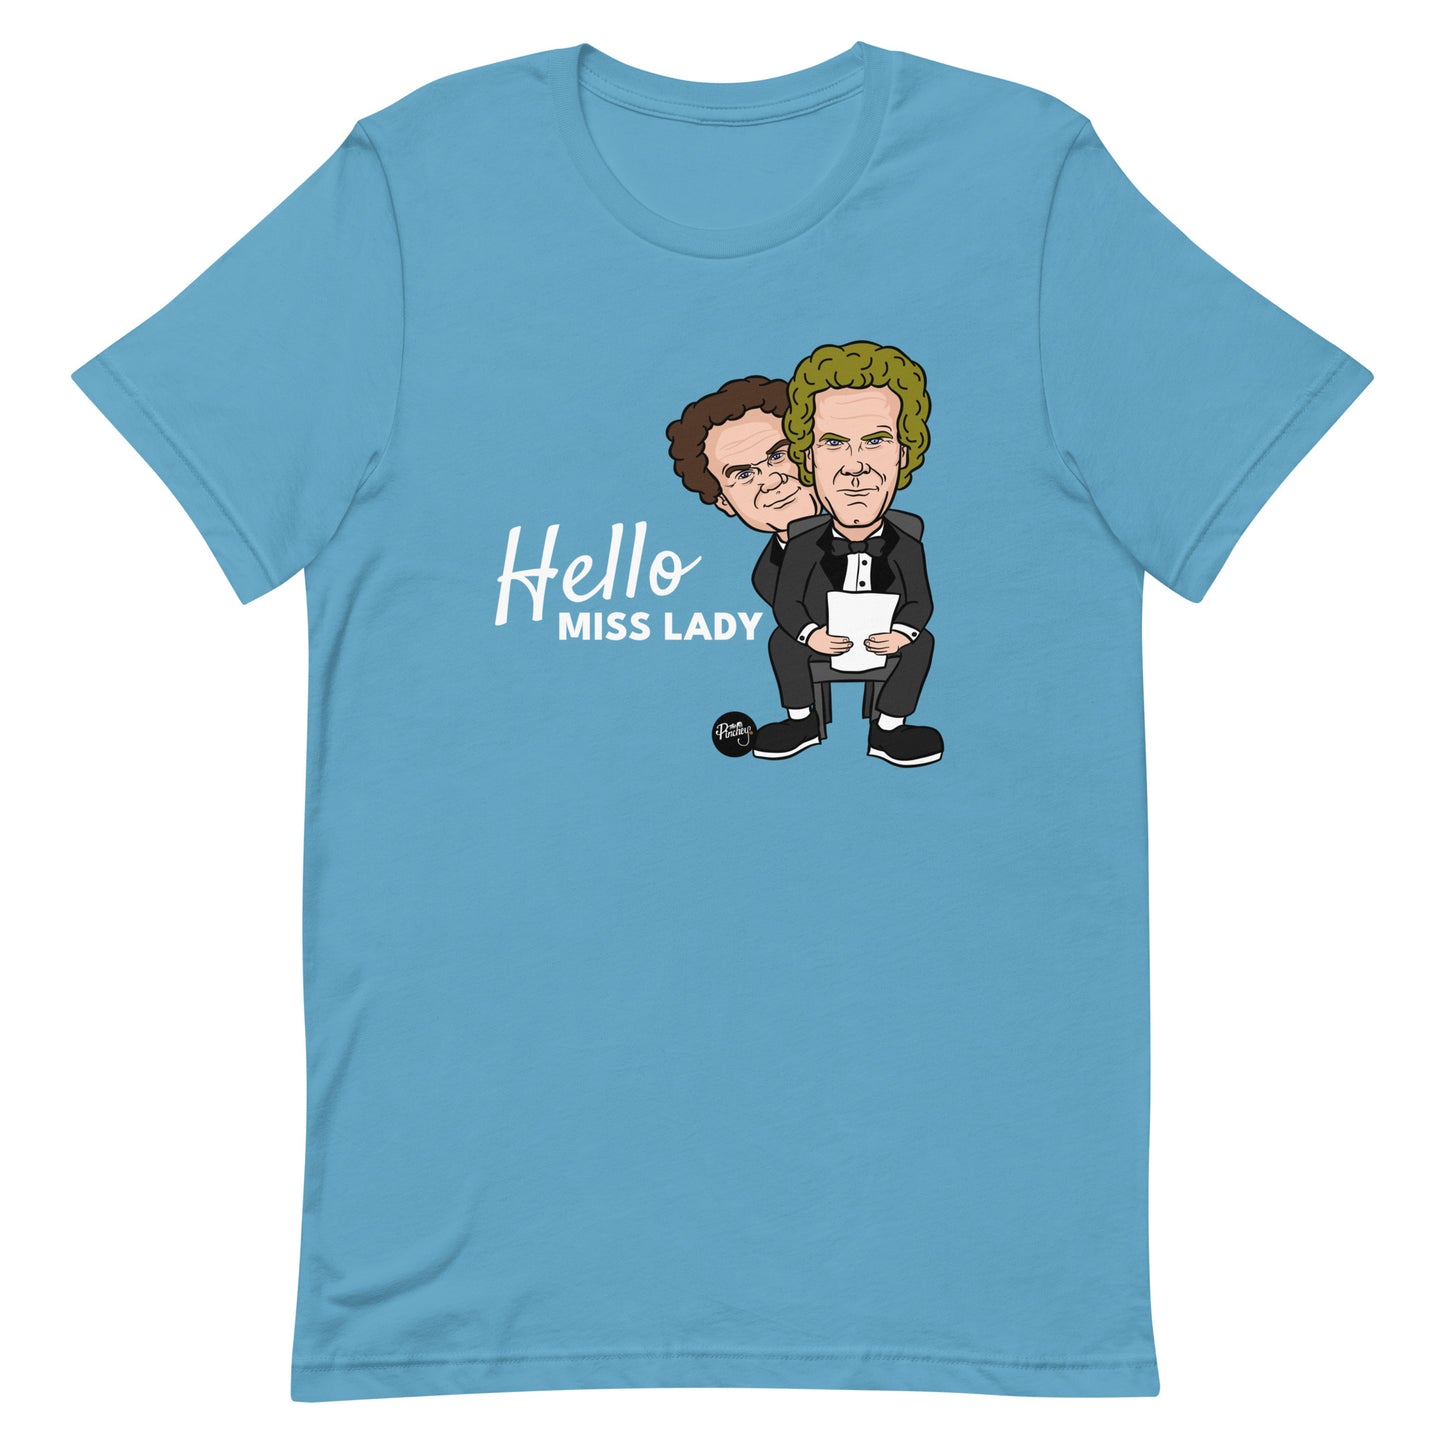 Step Brothers' Hello Miss Lady Unisex T-Shirt